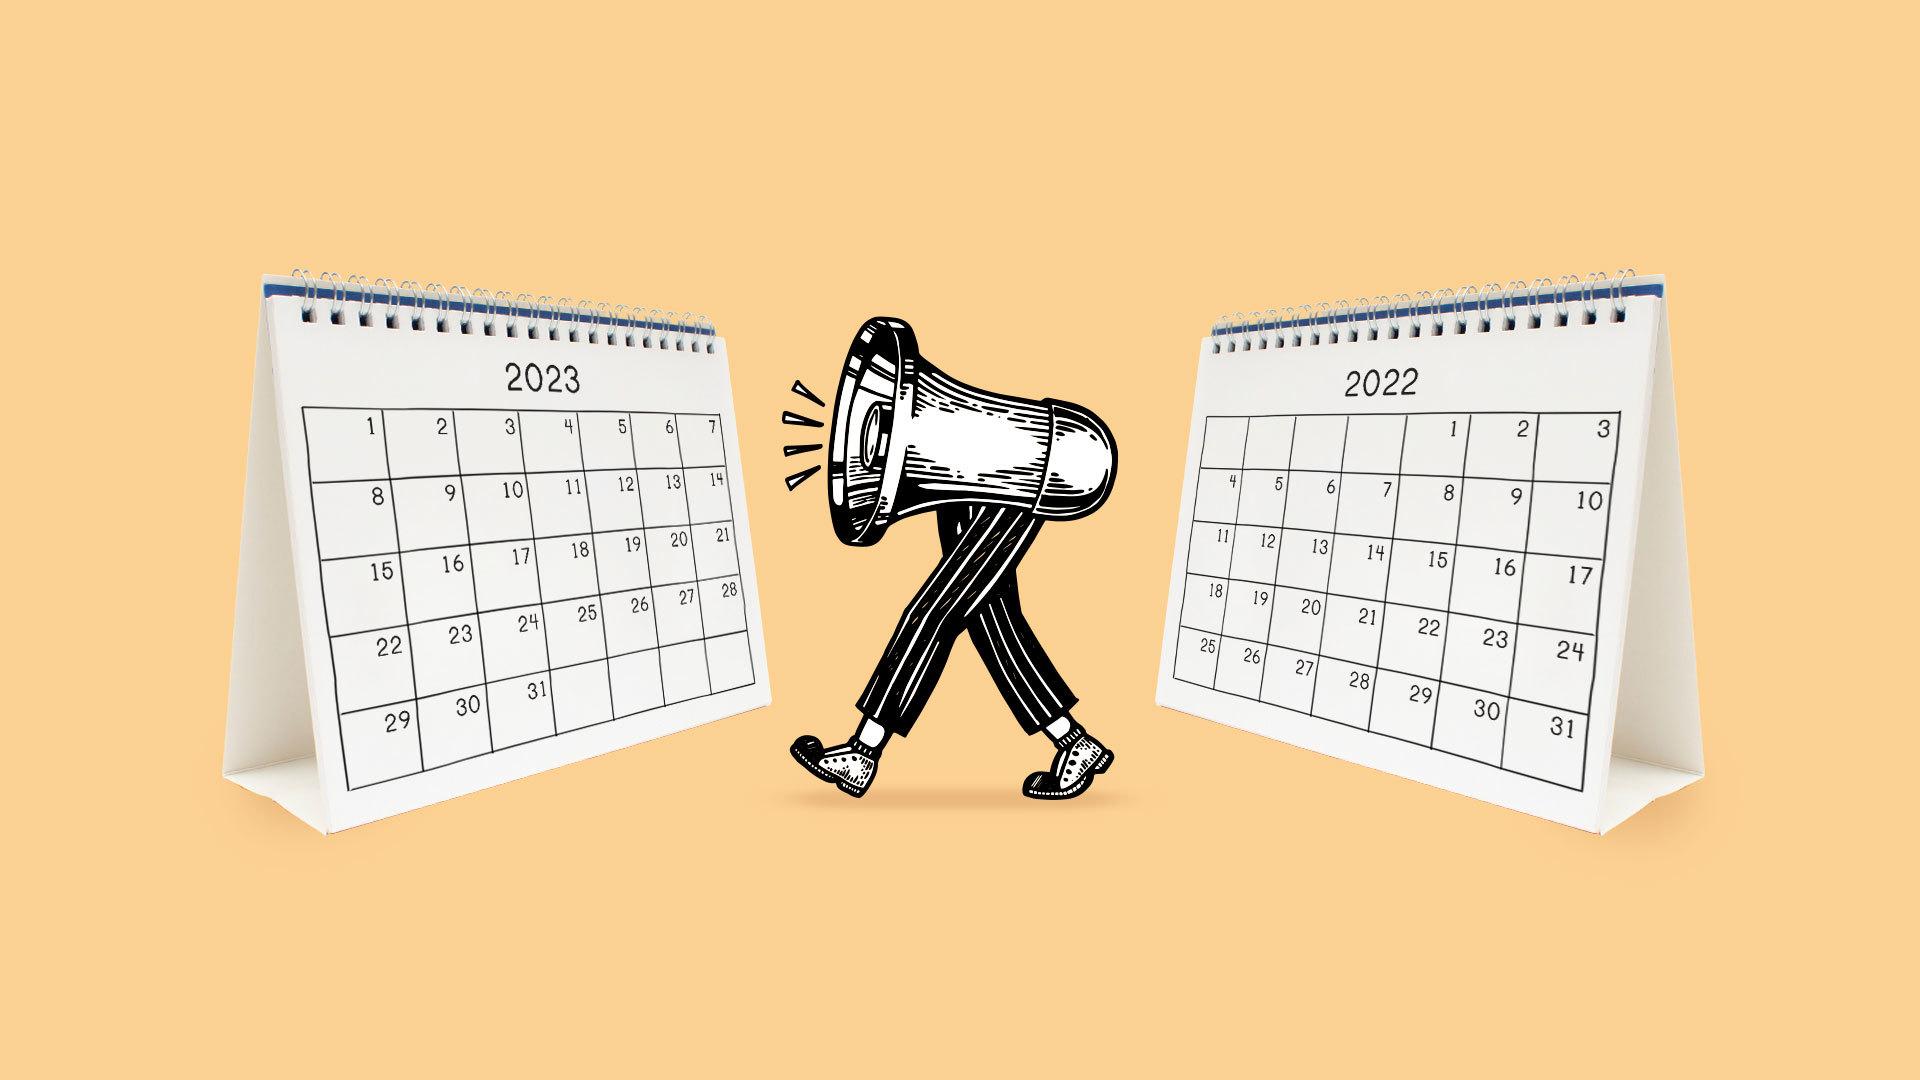 Graphic of megaphone with illustrated legs walking from a calendar for 2022, towards a calendar for 2023